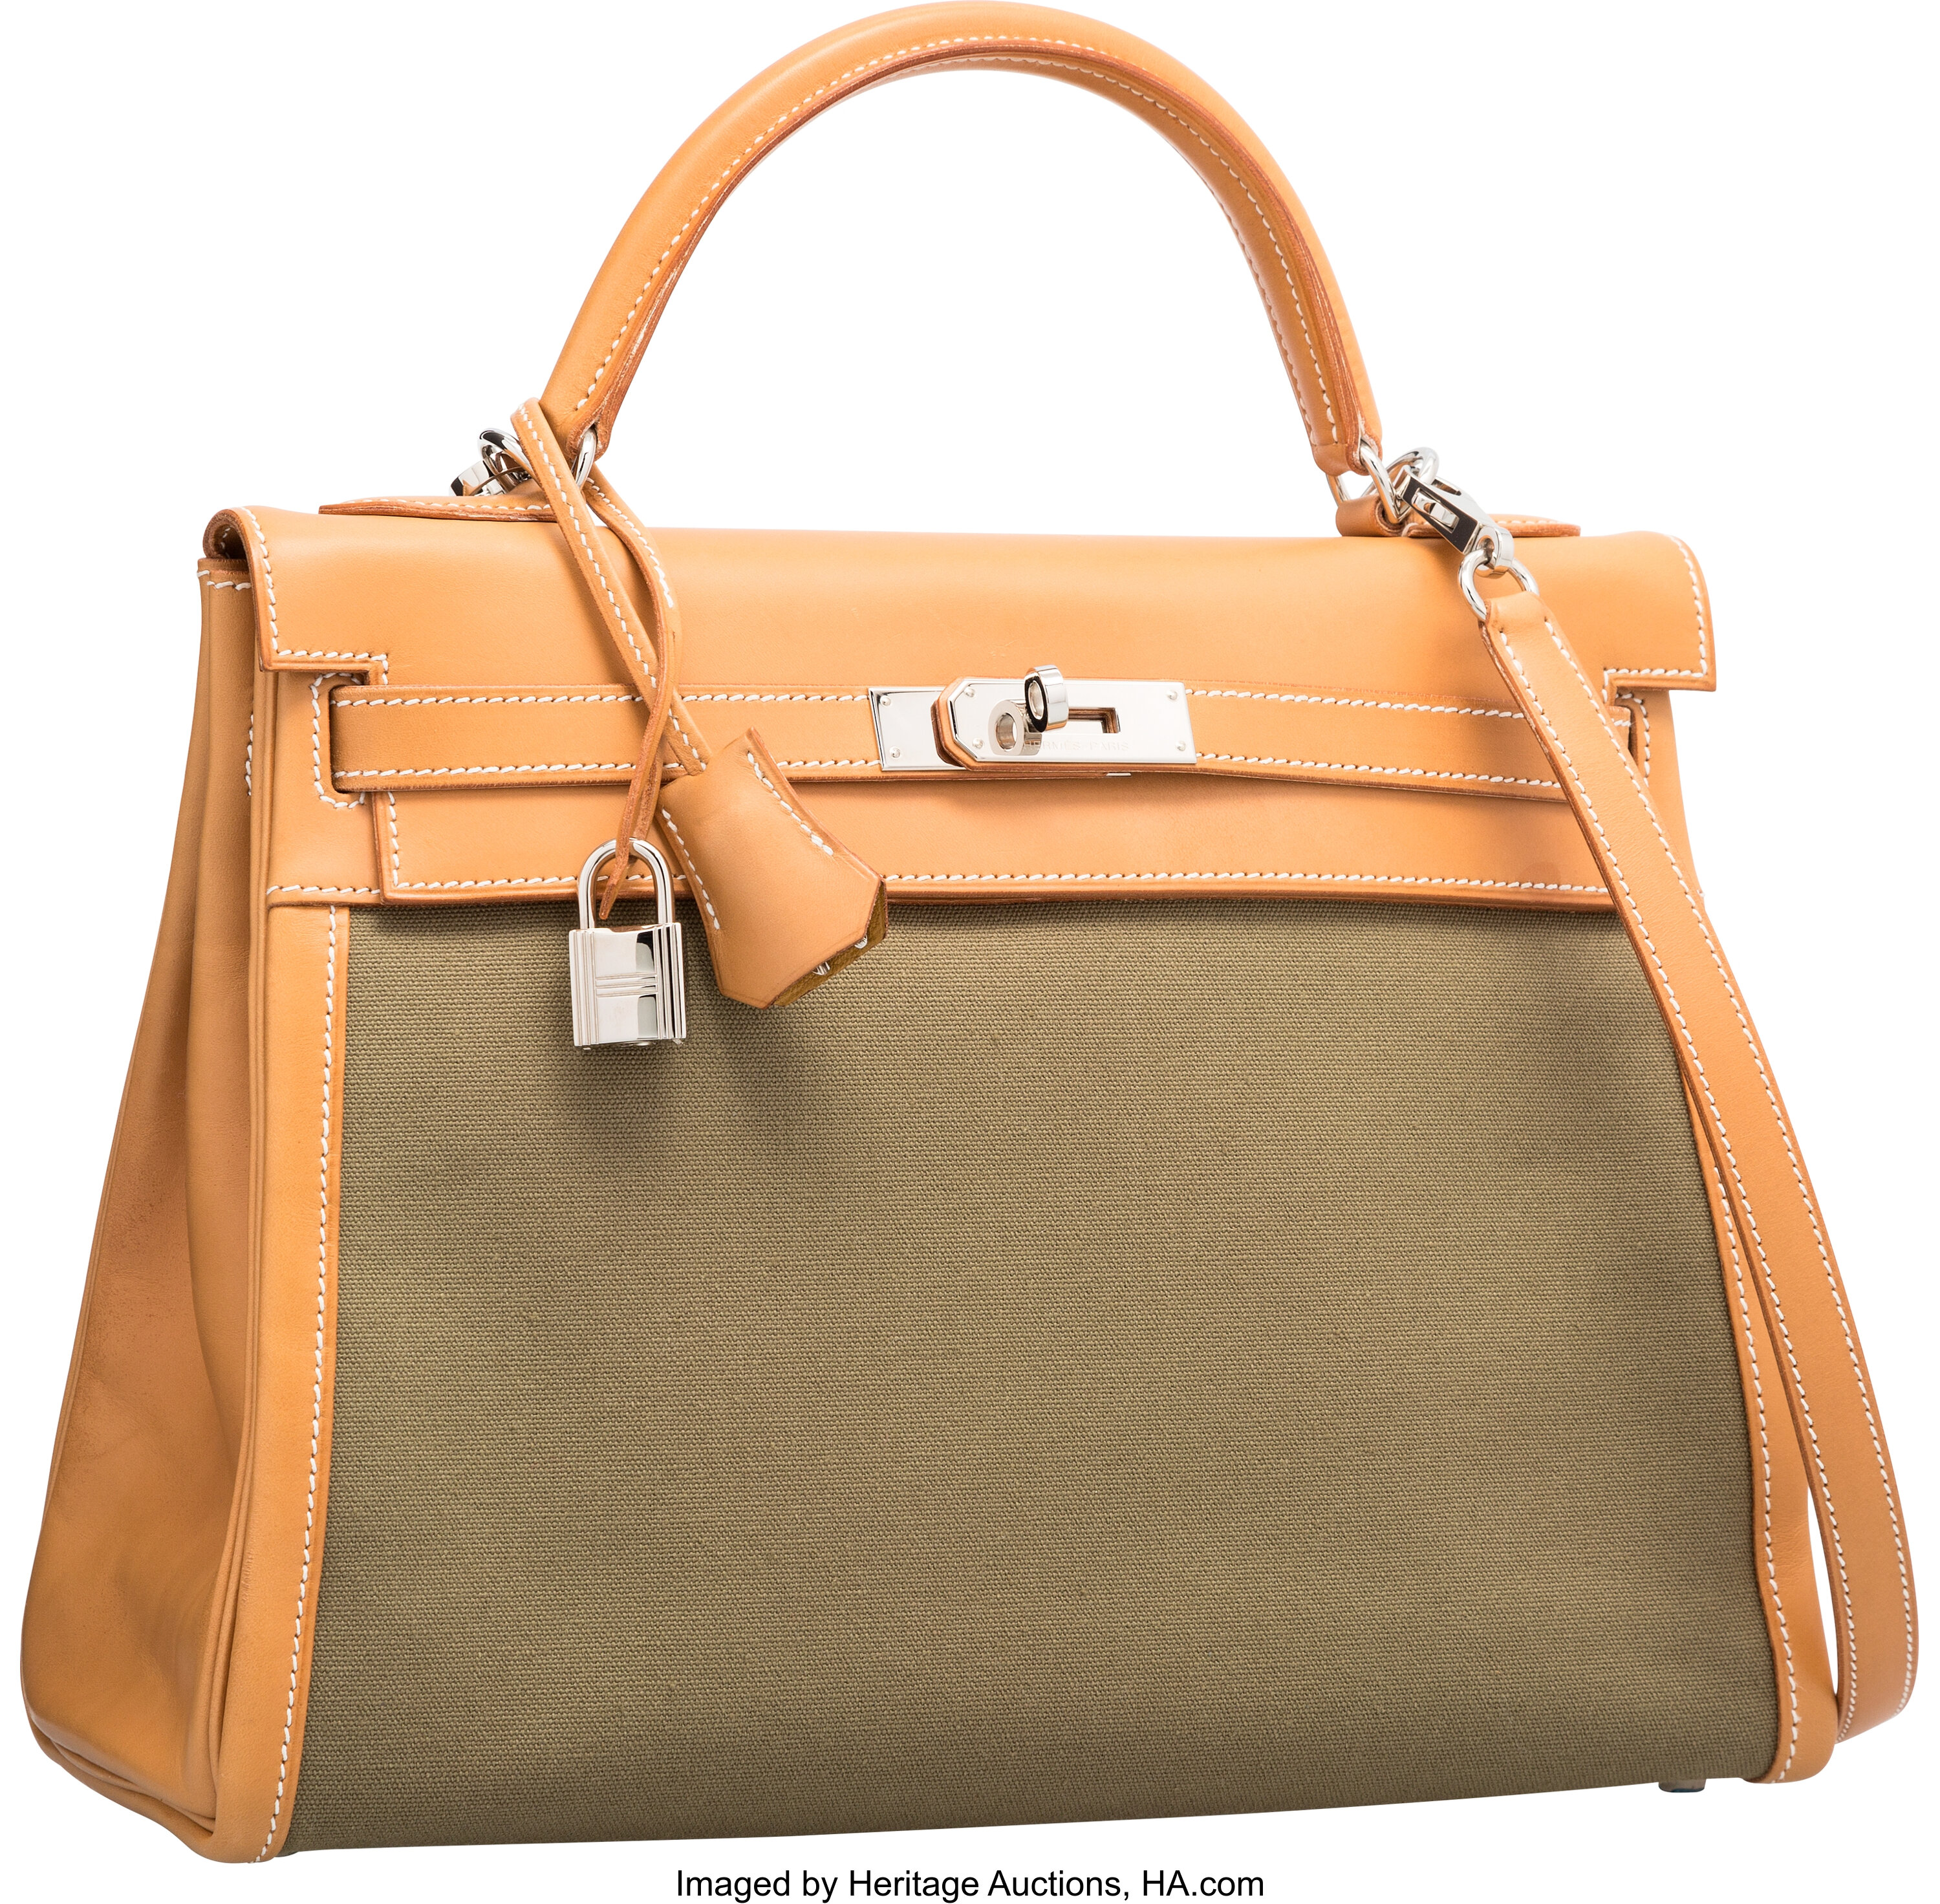 Hermes 32cm Vert Olive Barenia Leather and Toile Gold Plated Kelly